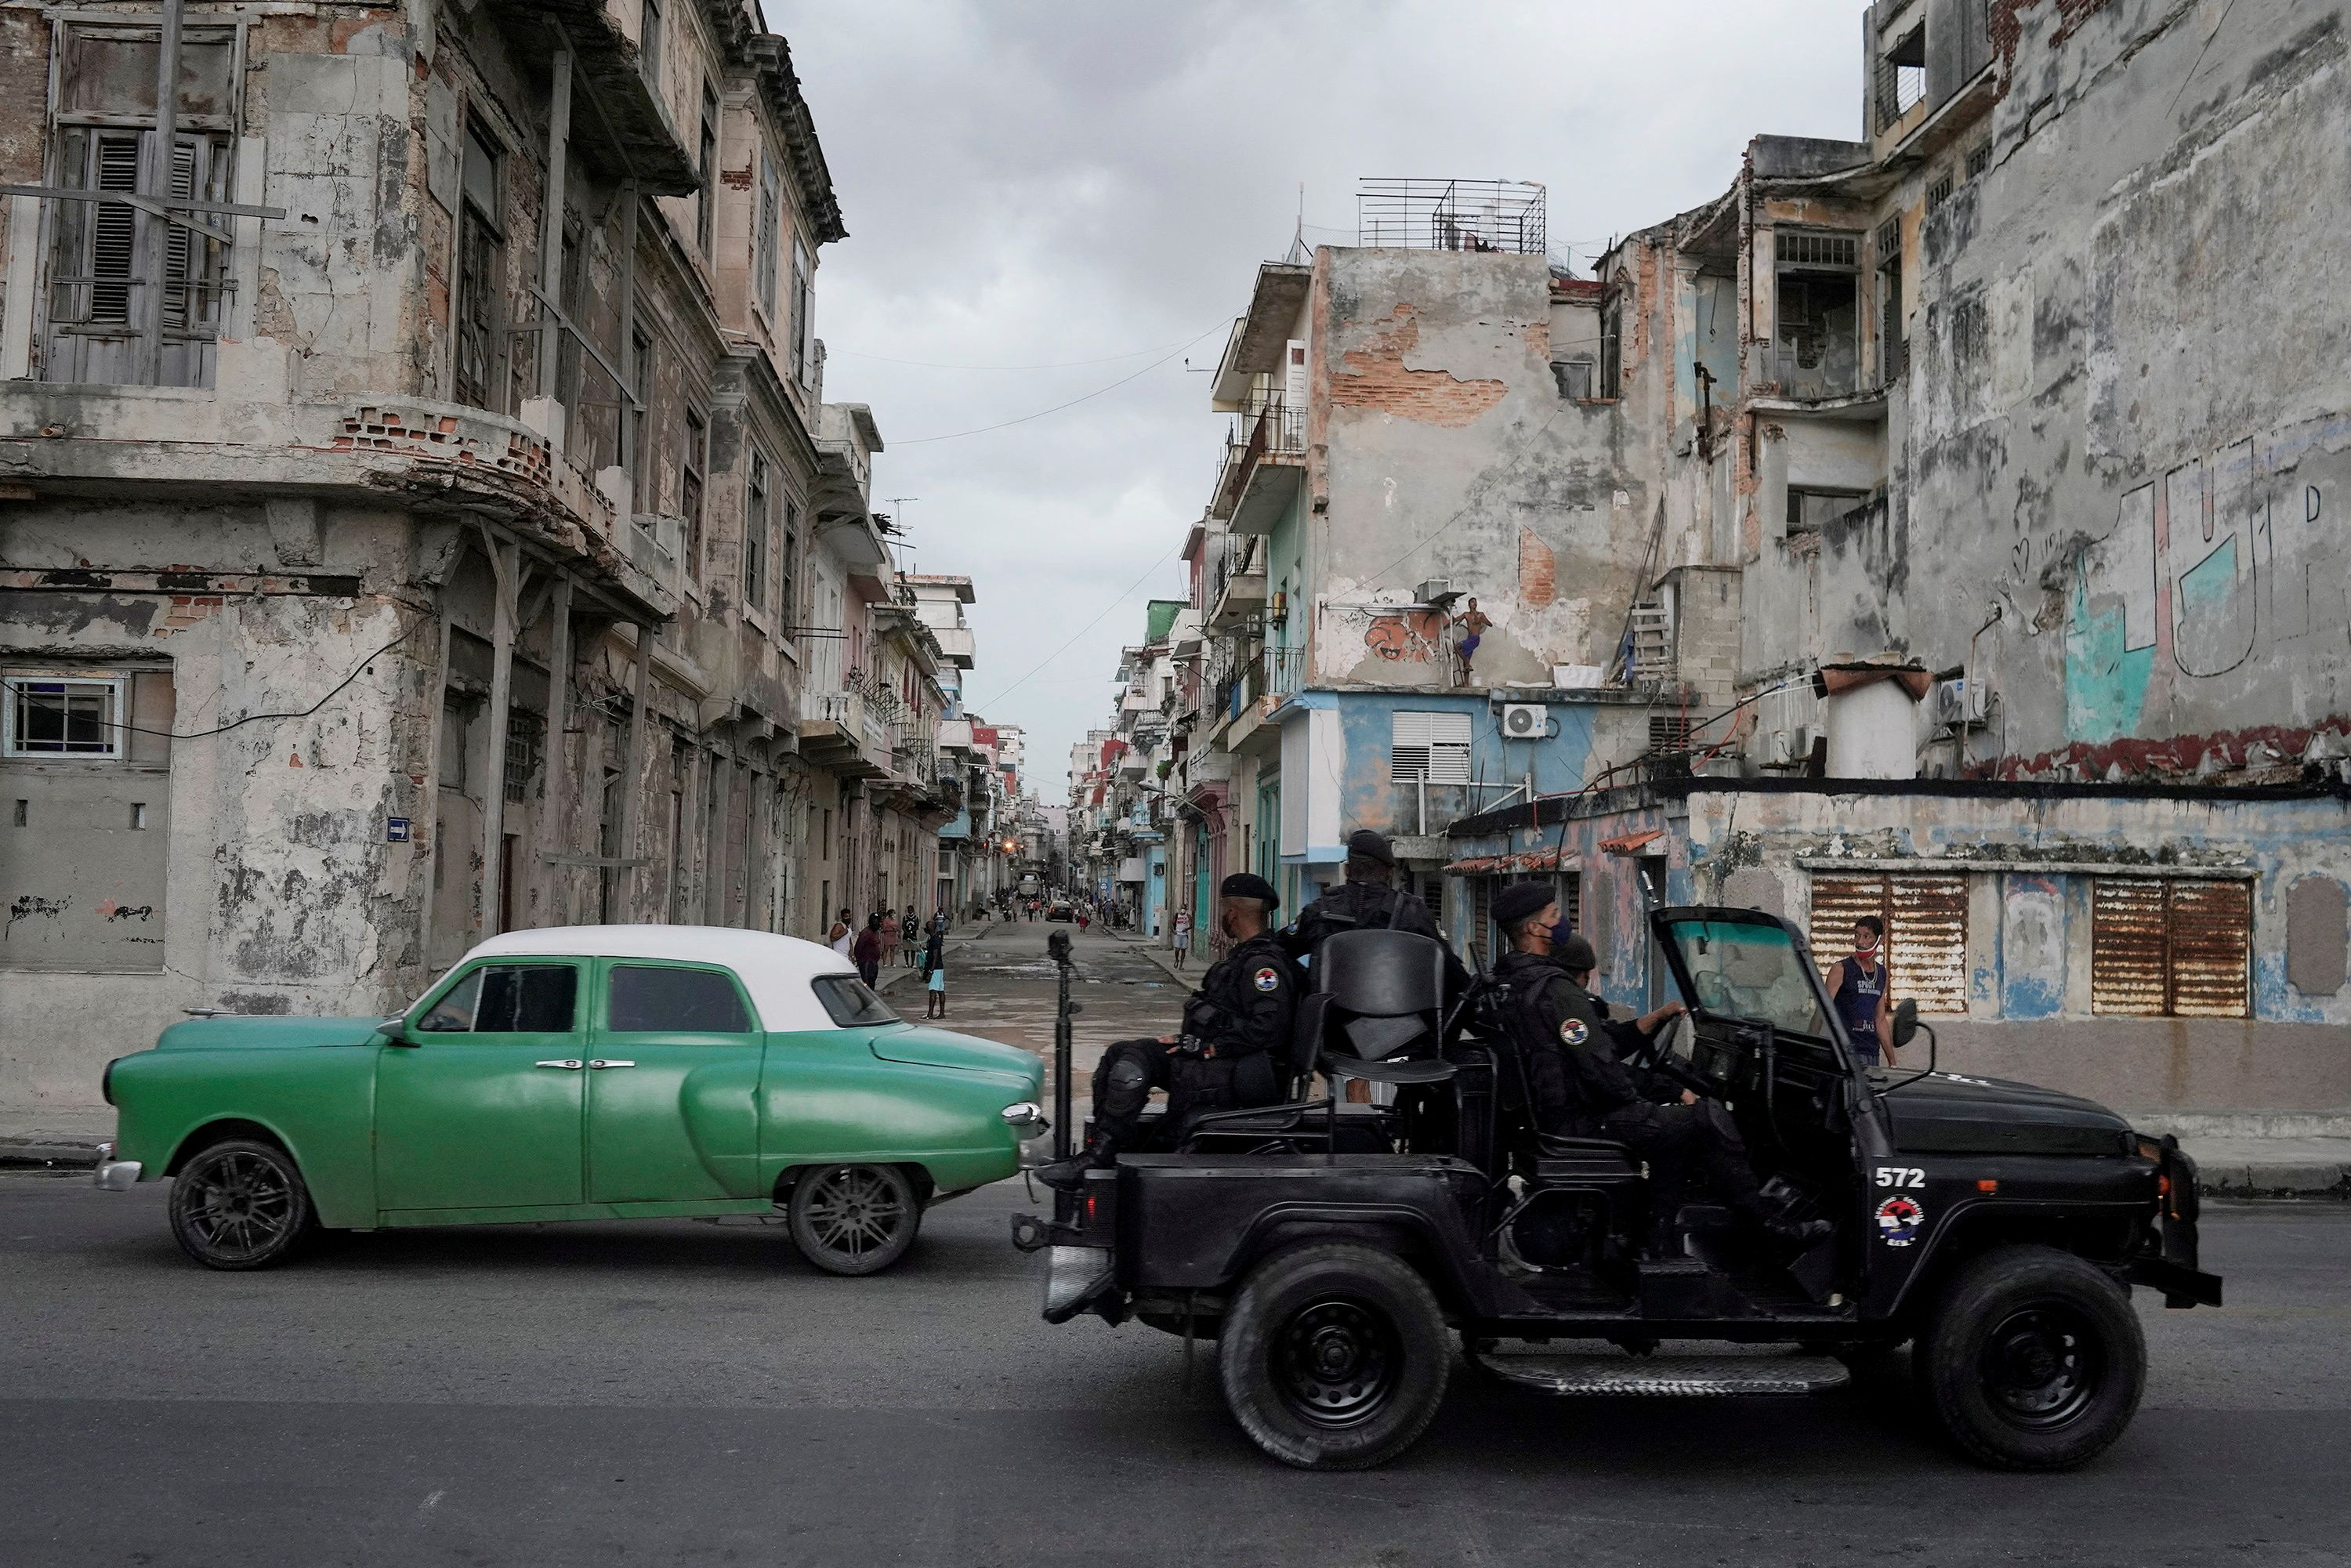 FILE PHOTO: A special forces vehicle drives past an old car in downtown Havana, Cuba on July 13, 2021. REUTERS/Alexandre Menegini/File Photo